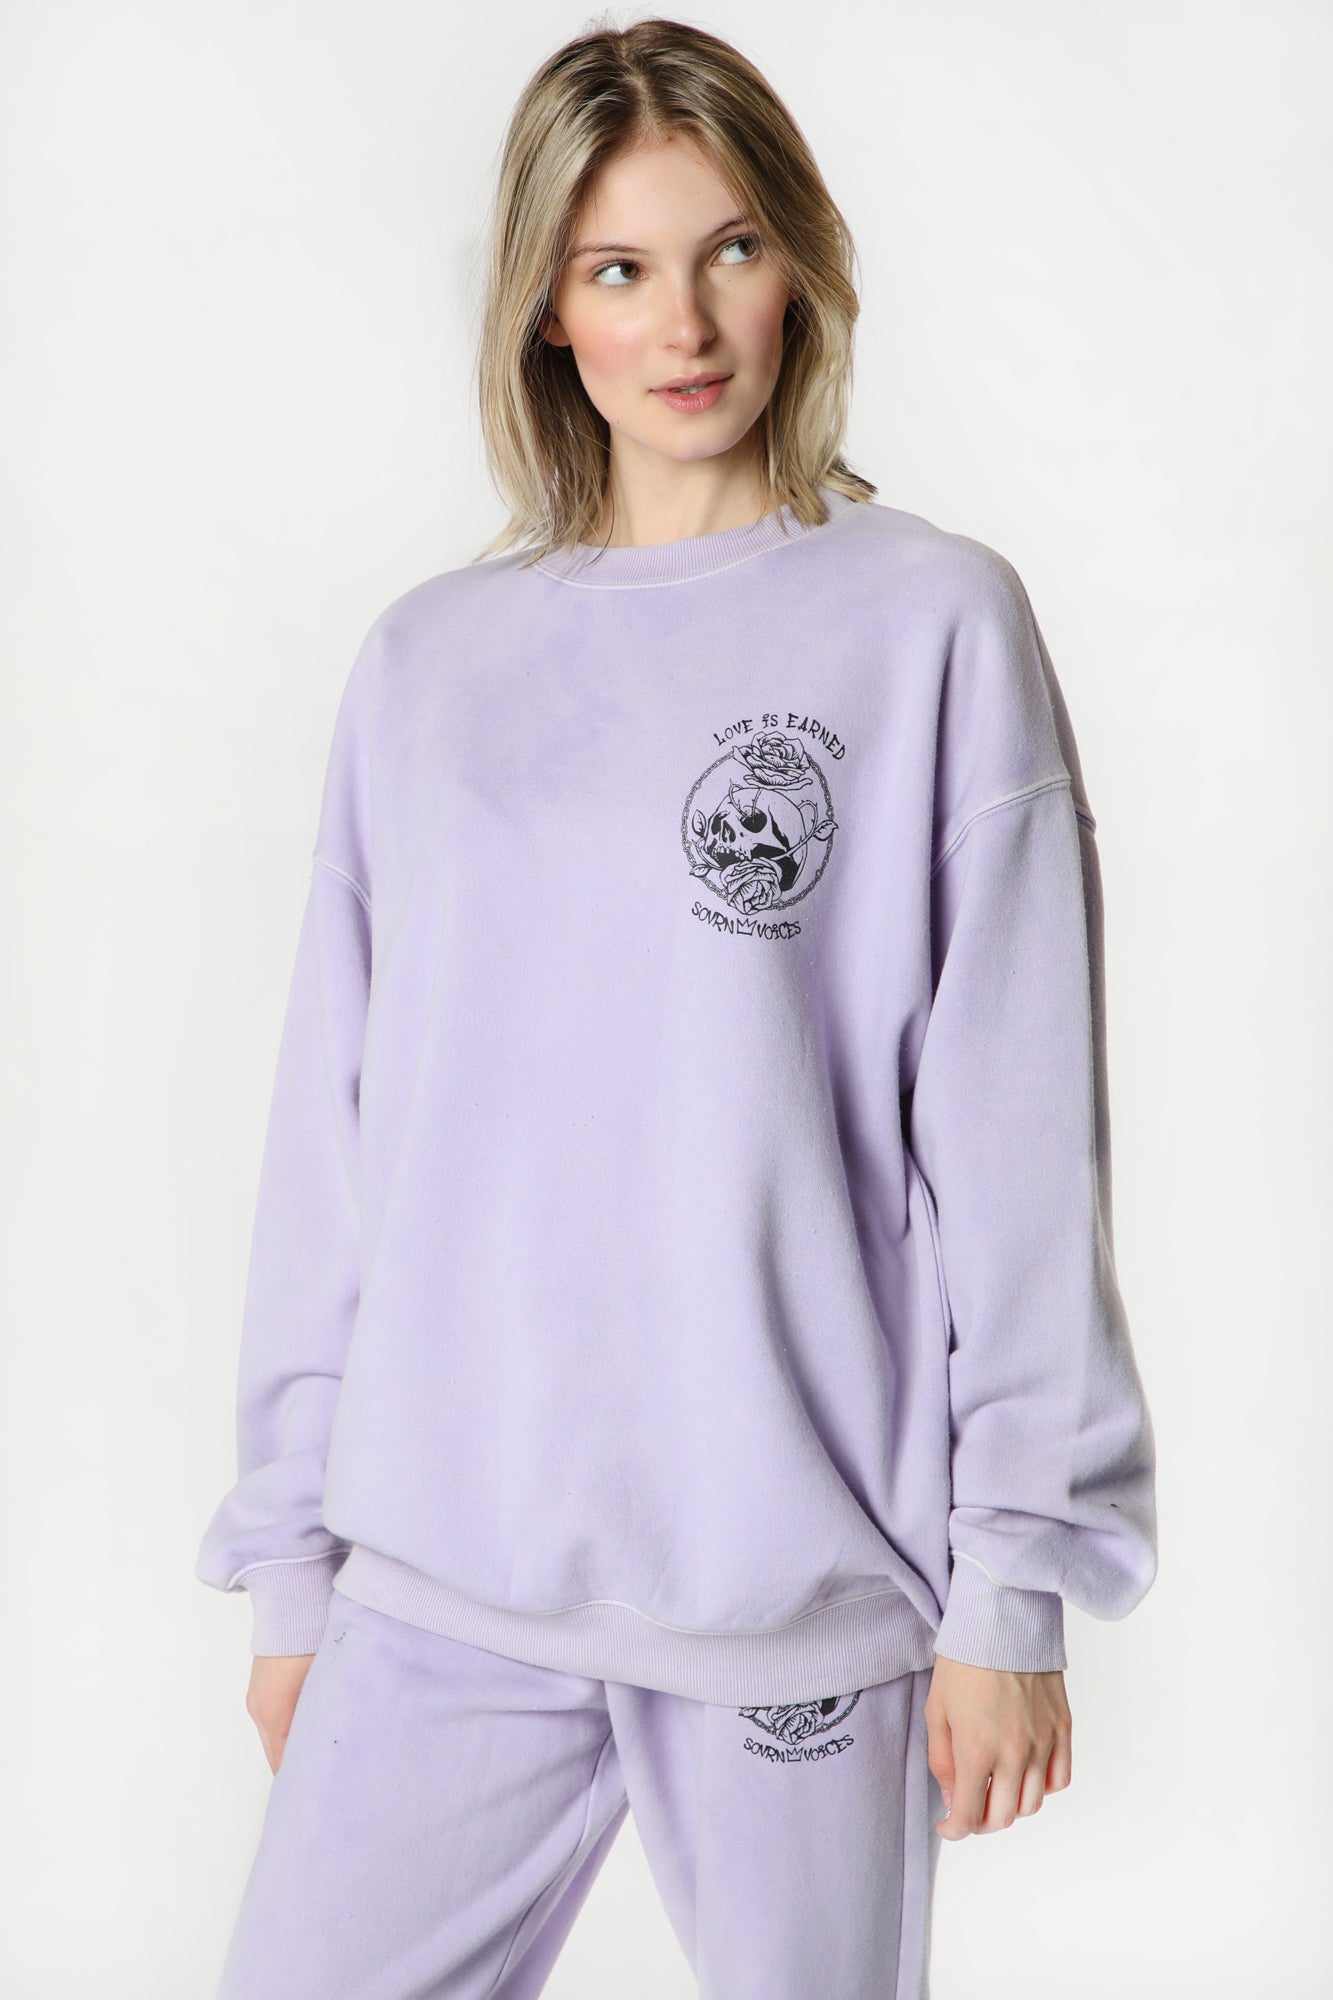 Womens Sovrn Voices Love is Earned Sweatshirt - Lilac /